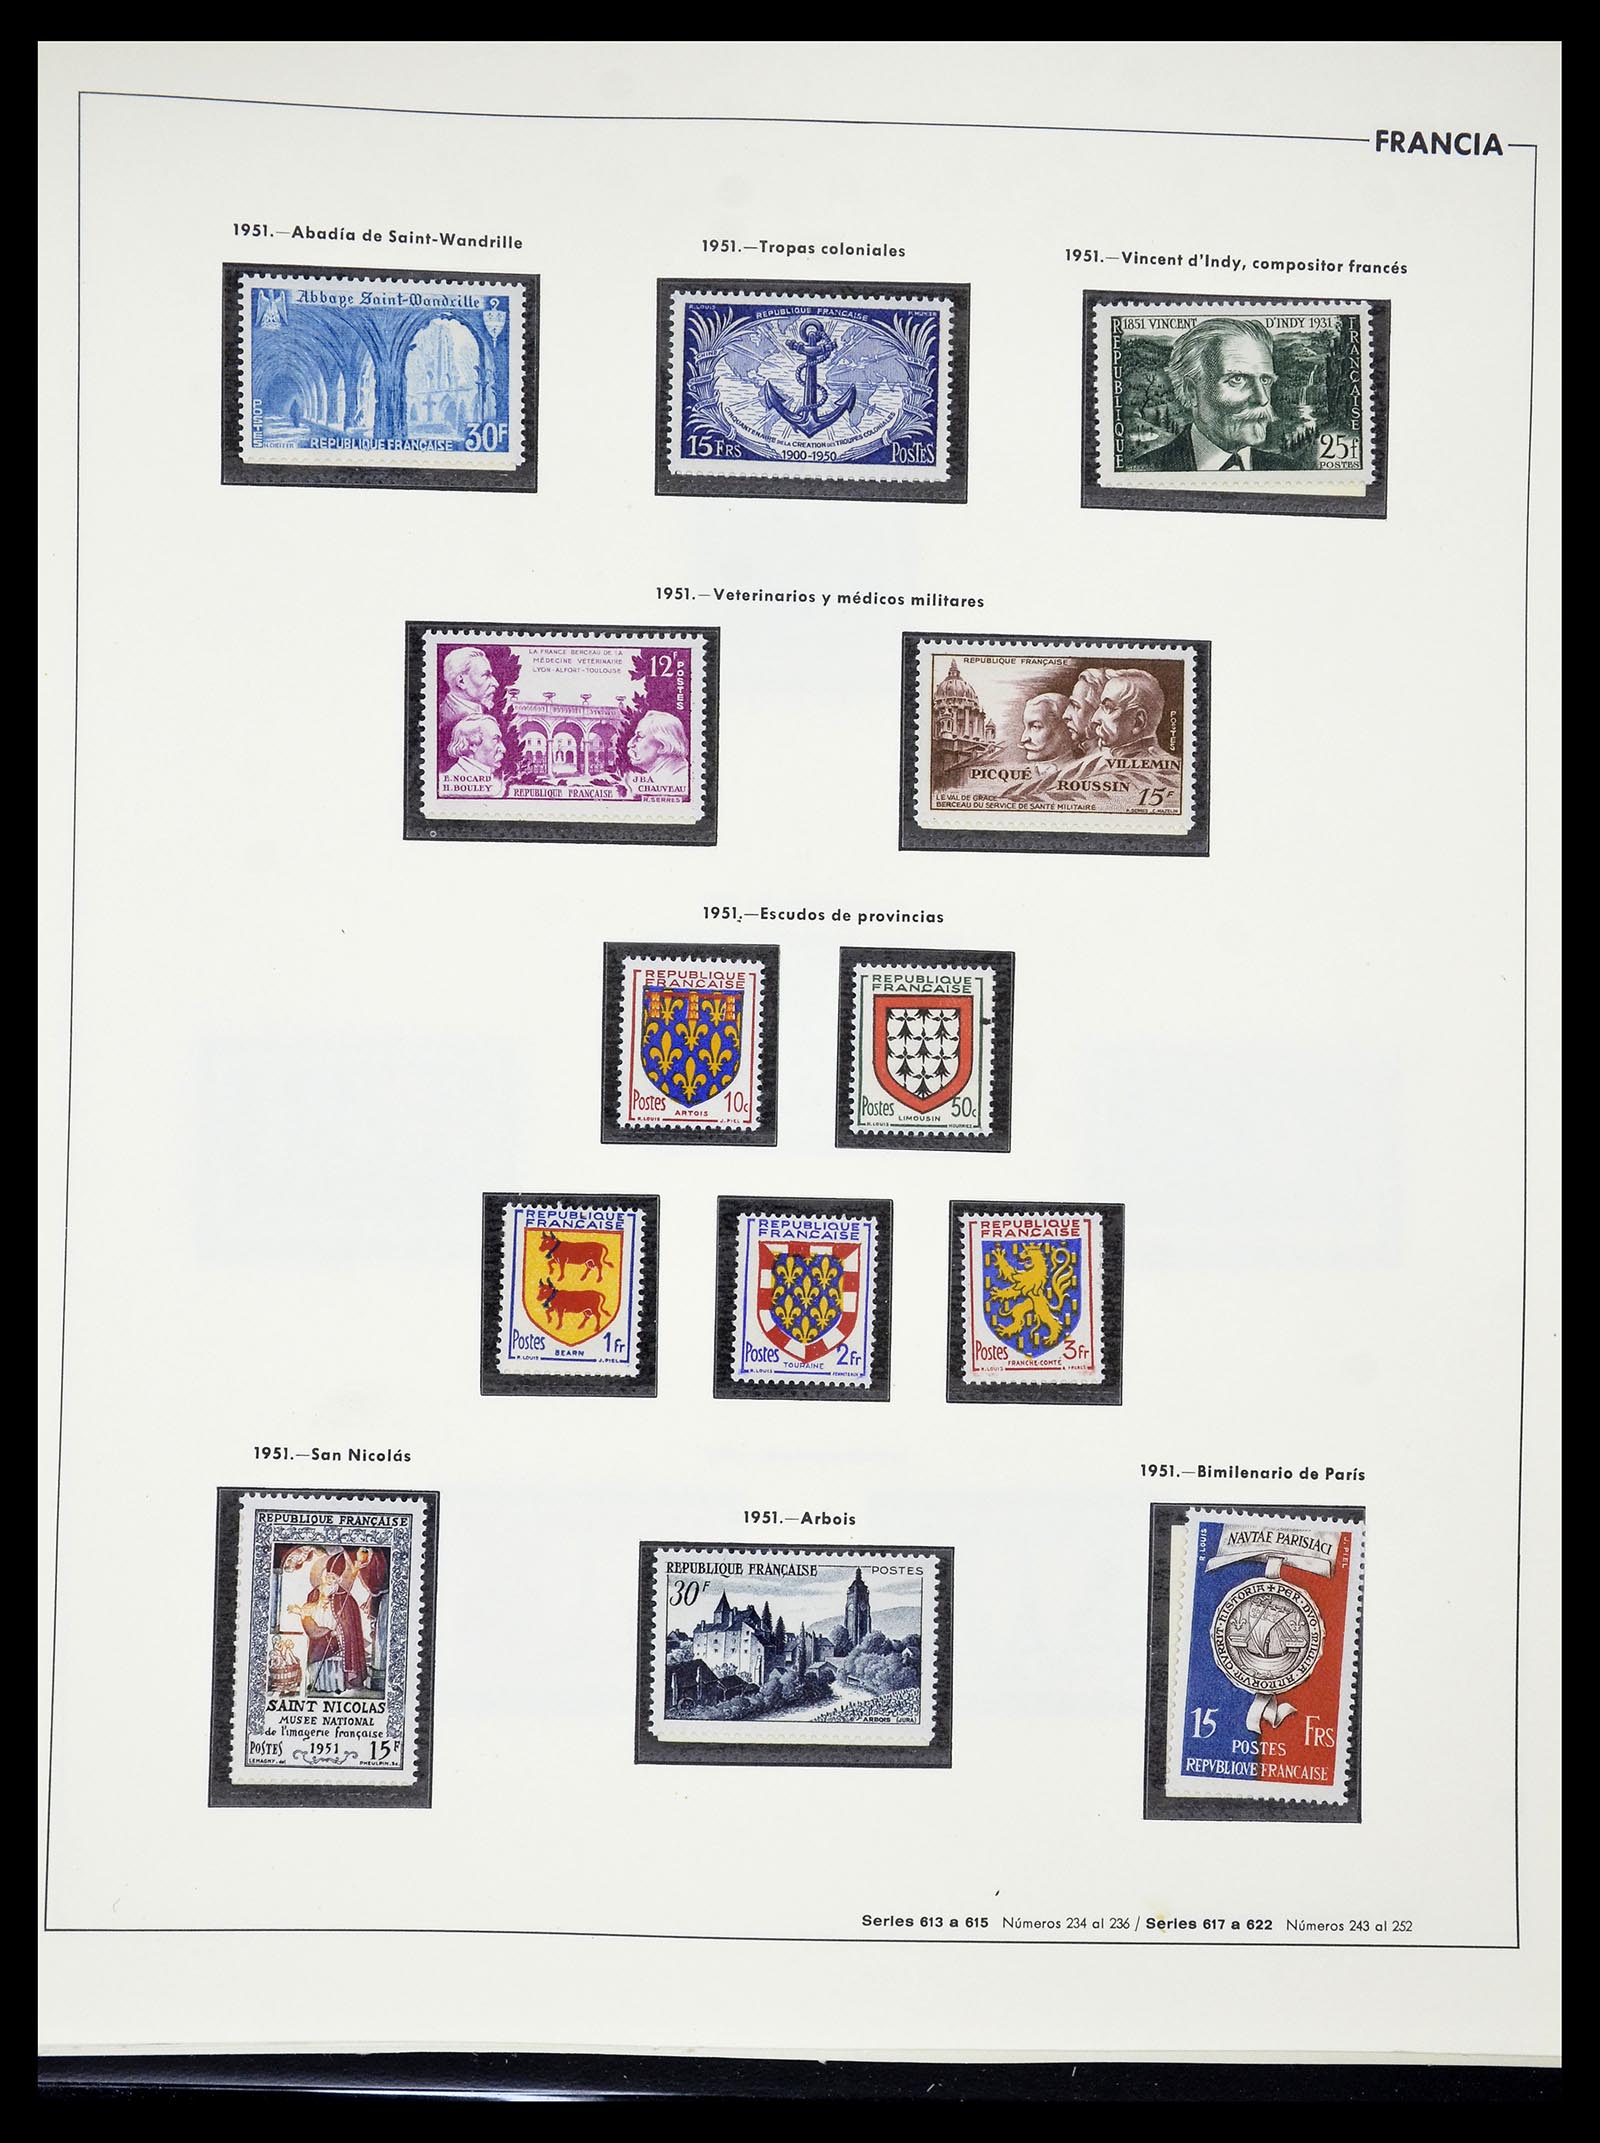 34755 072 - Stamp Collection 34755 France 1900-2000.